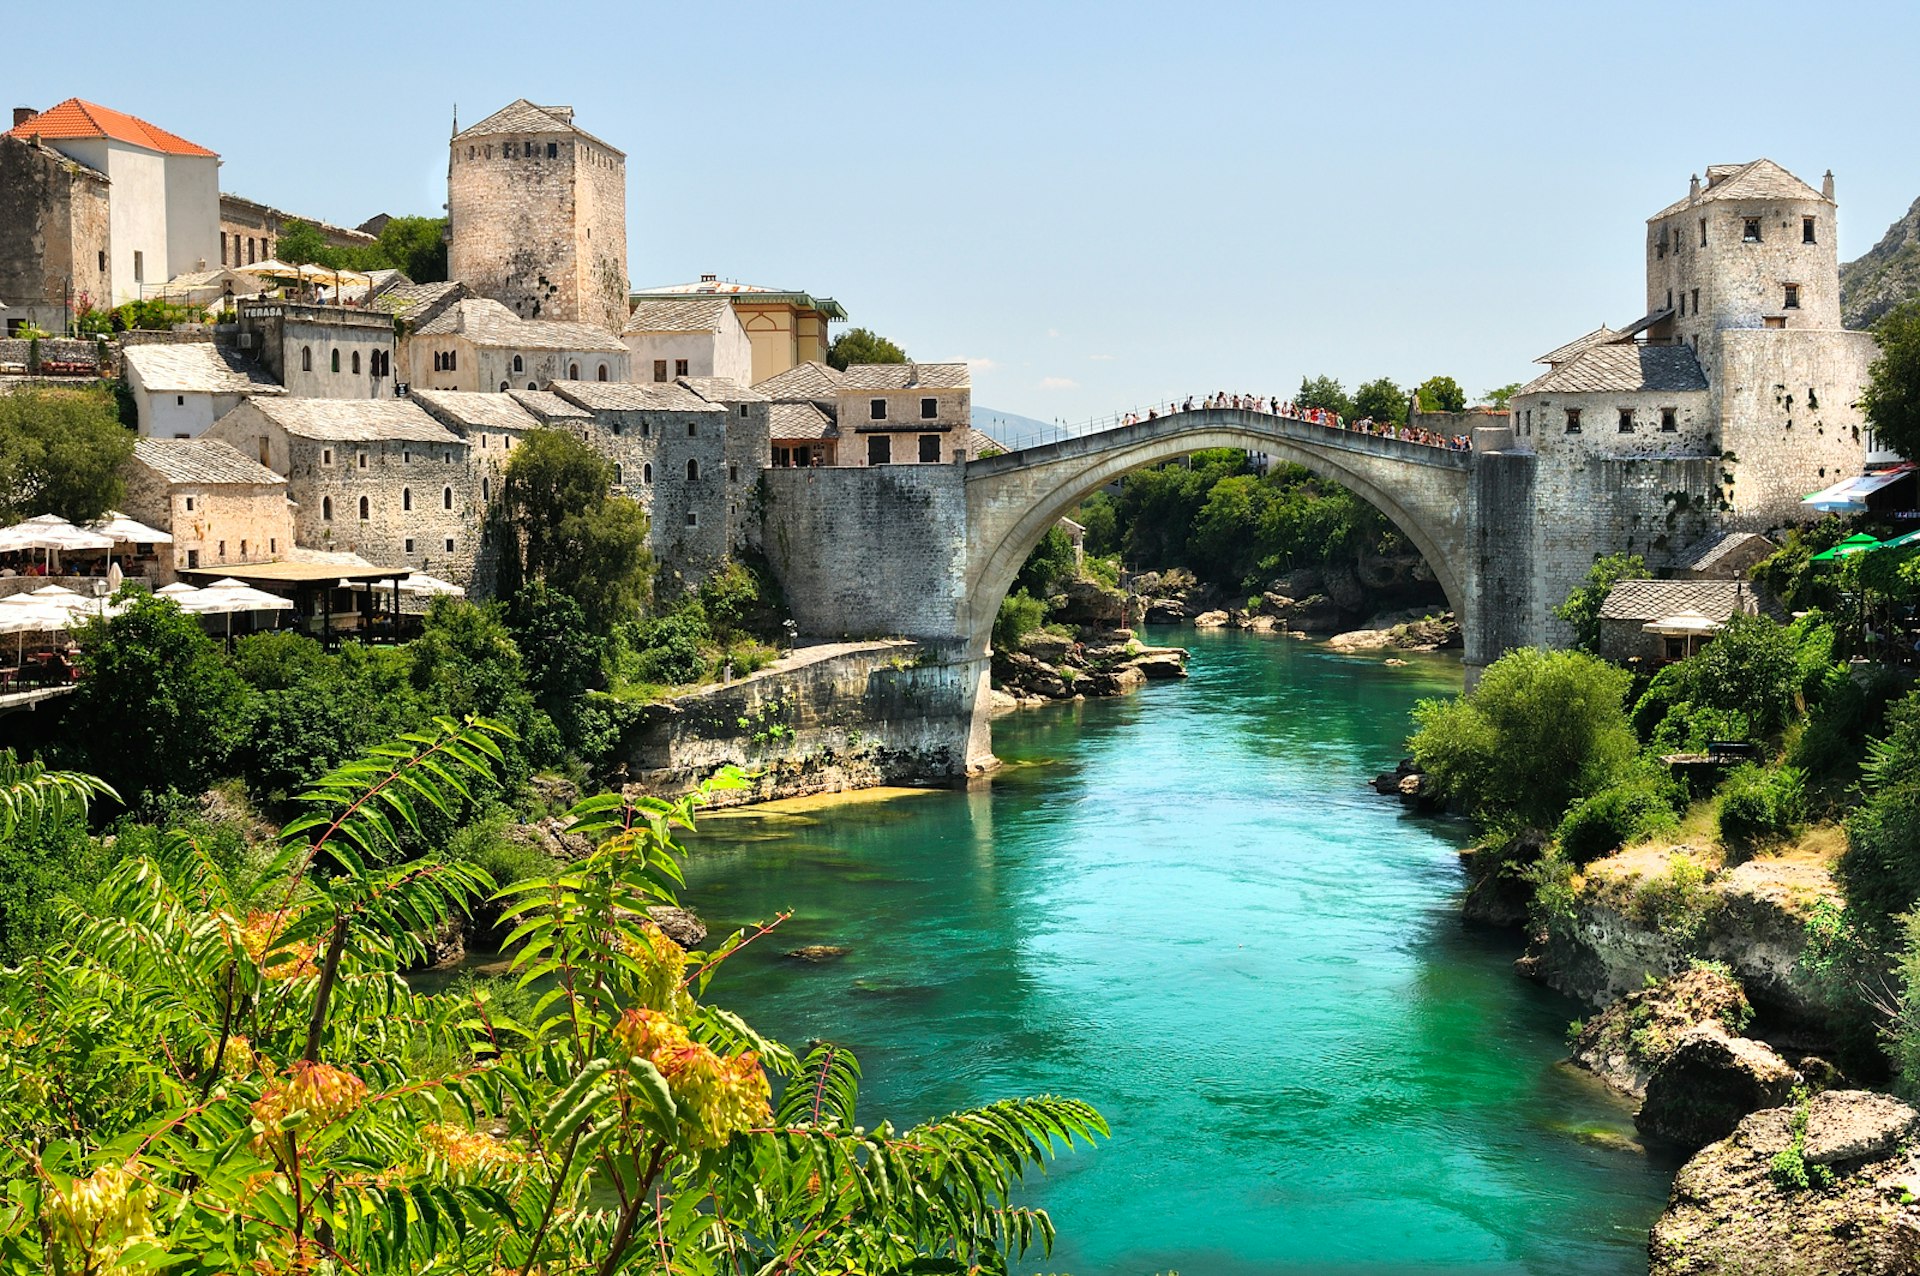 The elegant arch of Stari Bridge spans the turquoise waters of the river Neretva